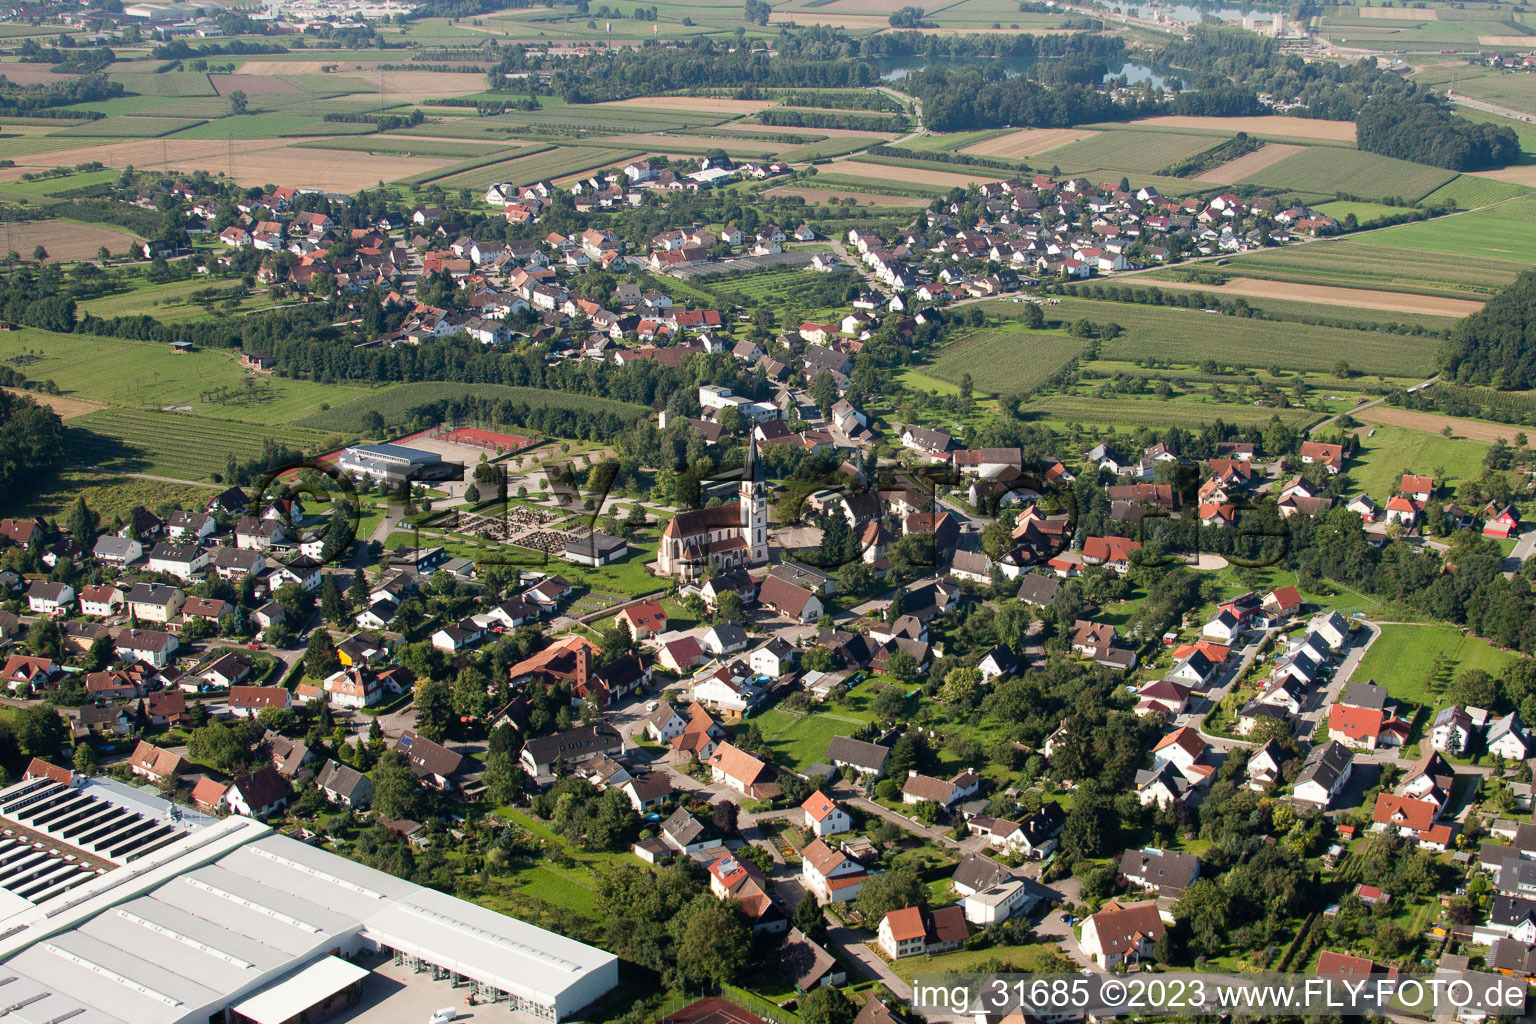 From the north in the district Großweier in Achern in the state Baden-Wuerttemberg, Germany